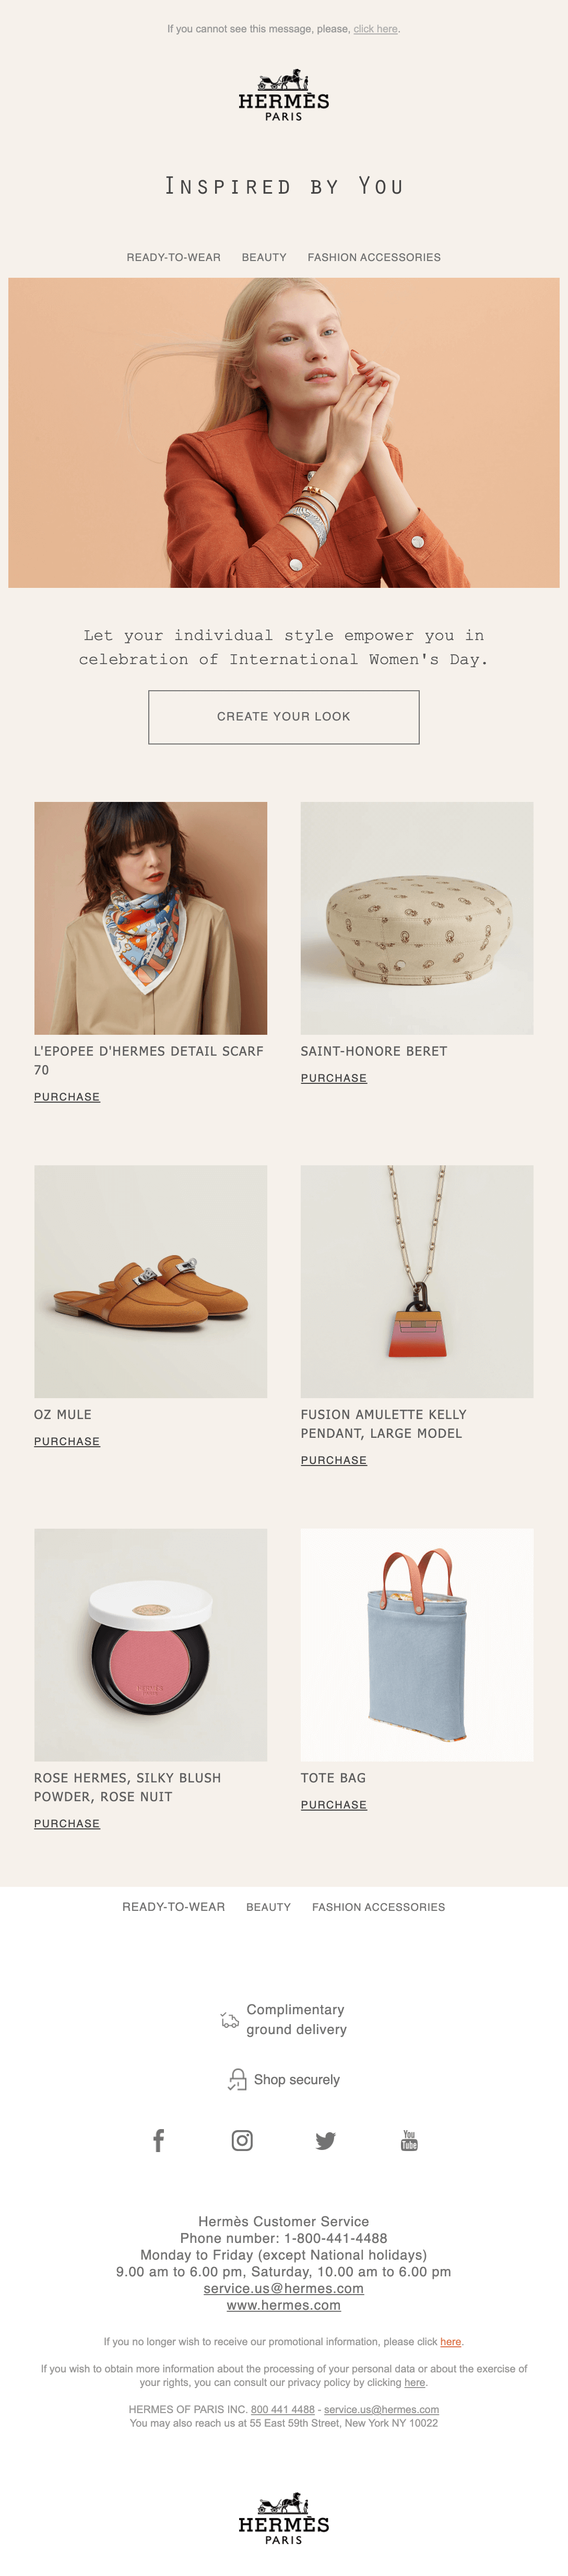 Email design by Hermes